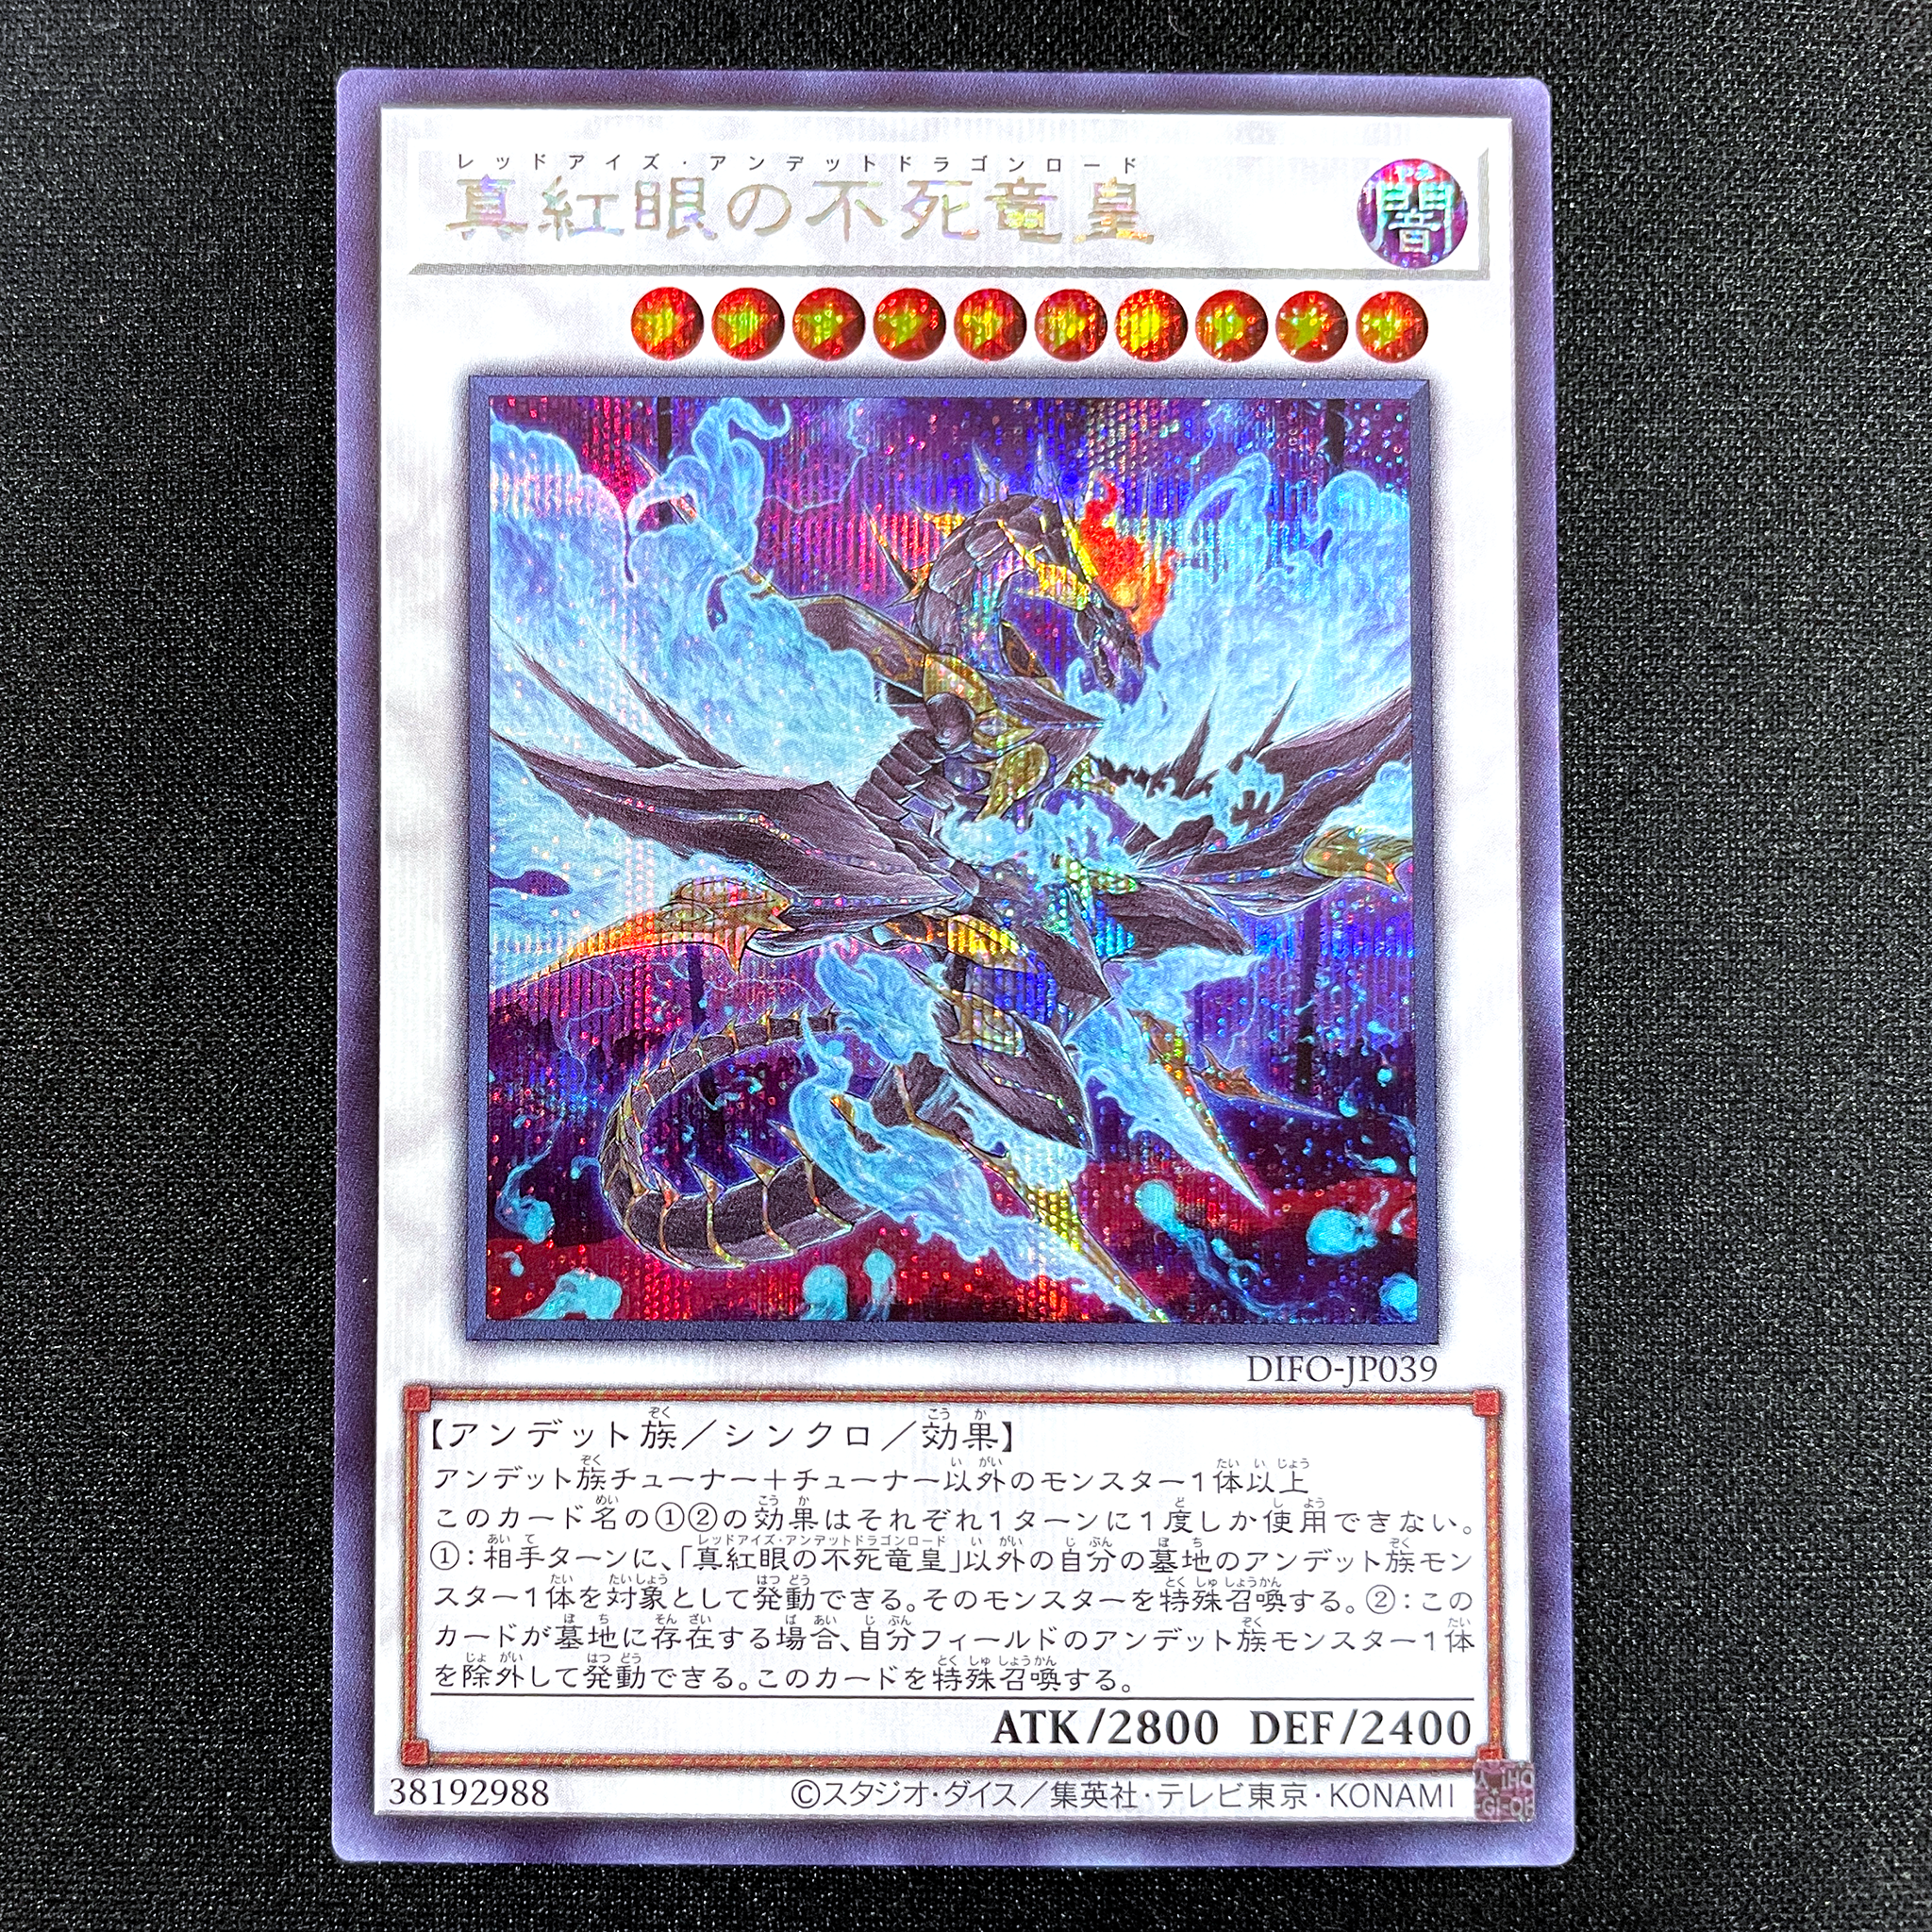 Yu-Gi-Oh! Official Card Game Duel Monsters ｢DIMENSION FORCE｣  Yu-Gi-Oh! Official Card Game DIFO-JP039 Secret Rare card